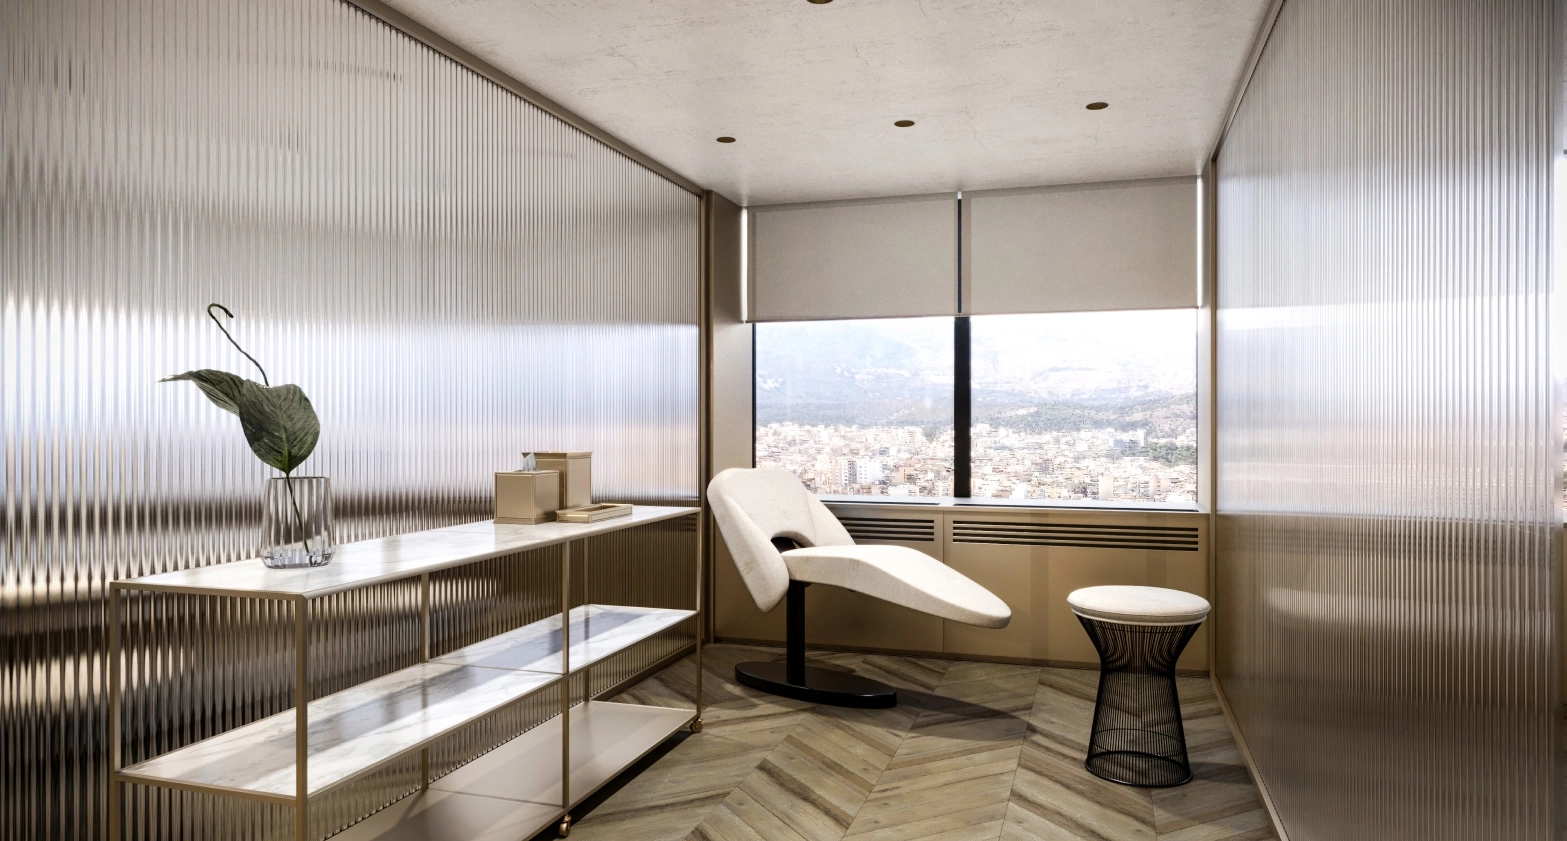 Athens Tower – Plastic Surgery Clinic